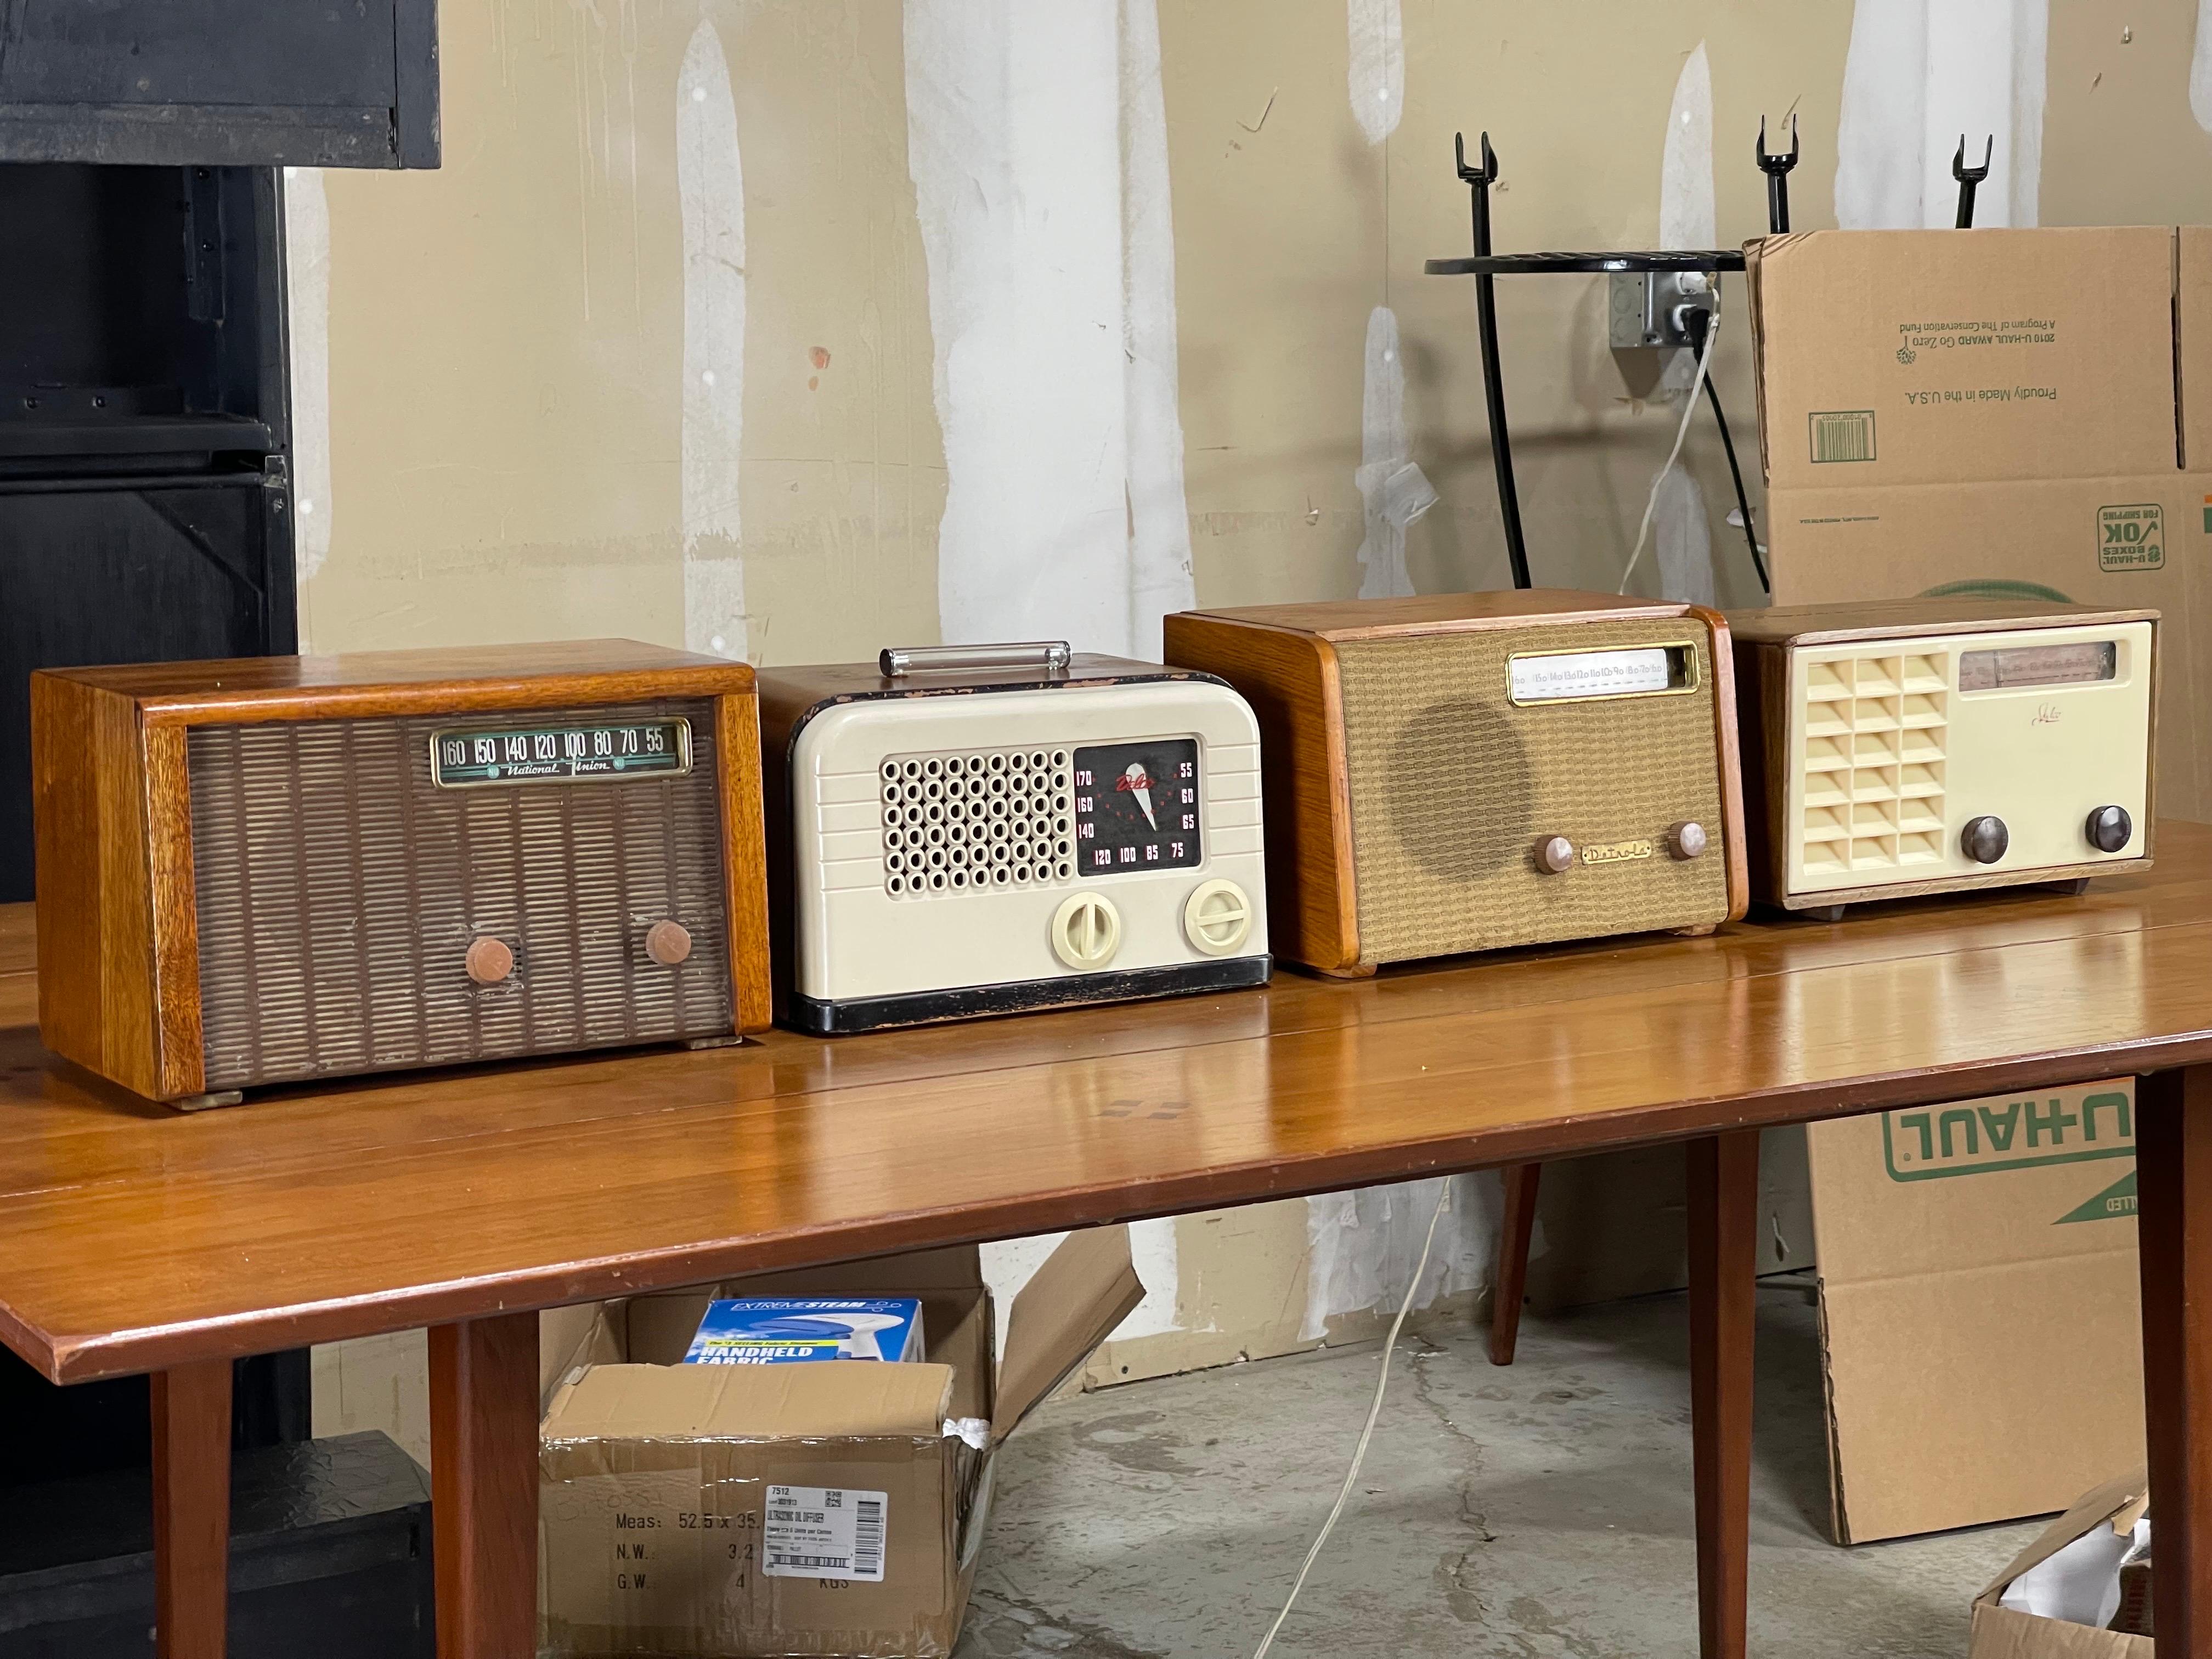 Incredible collection of Alexander Girard designed radios for various manufacturers. The radios were designed by Girard while he was at Detrola in the late 40’s, and some of them were sold under different company names. Listed are: Detrola (second